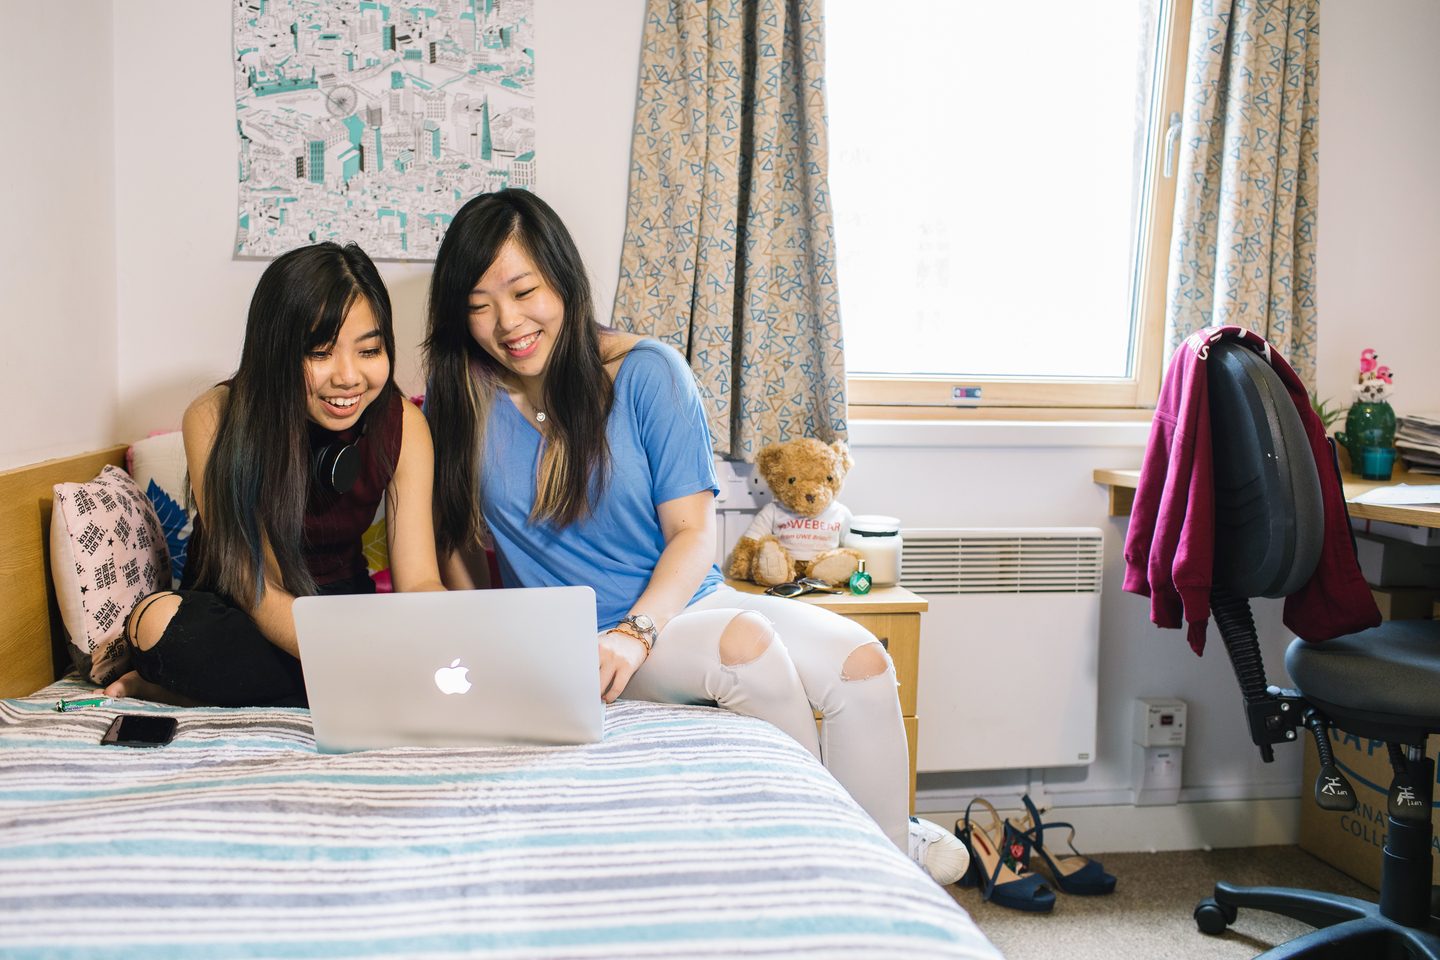 Students looking at a laptop on the bed